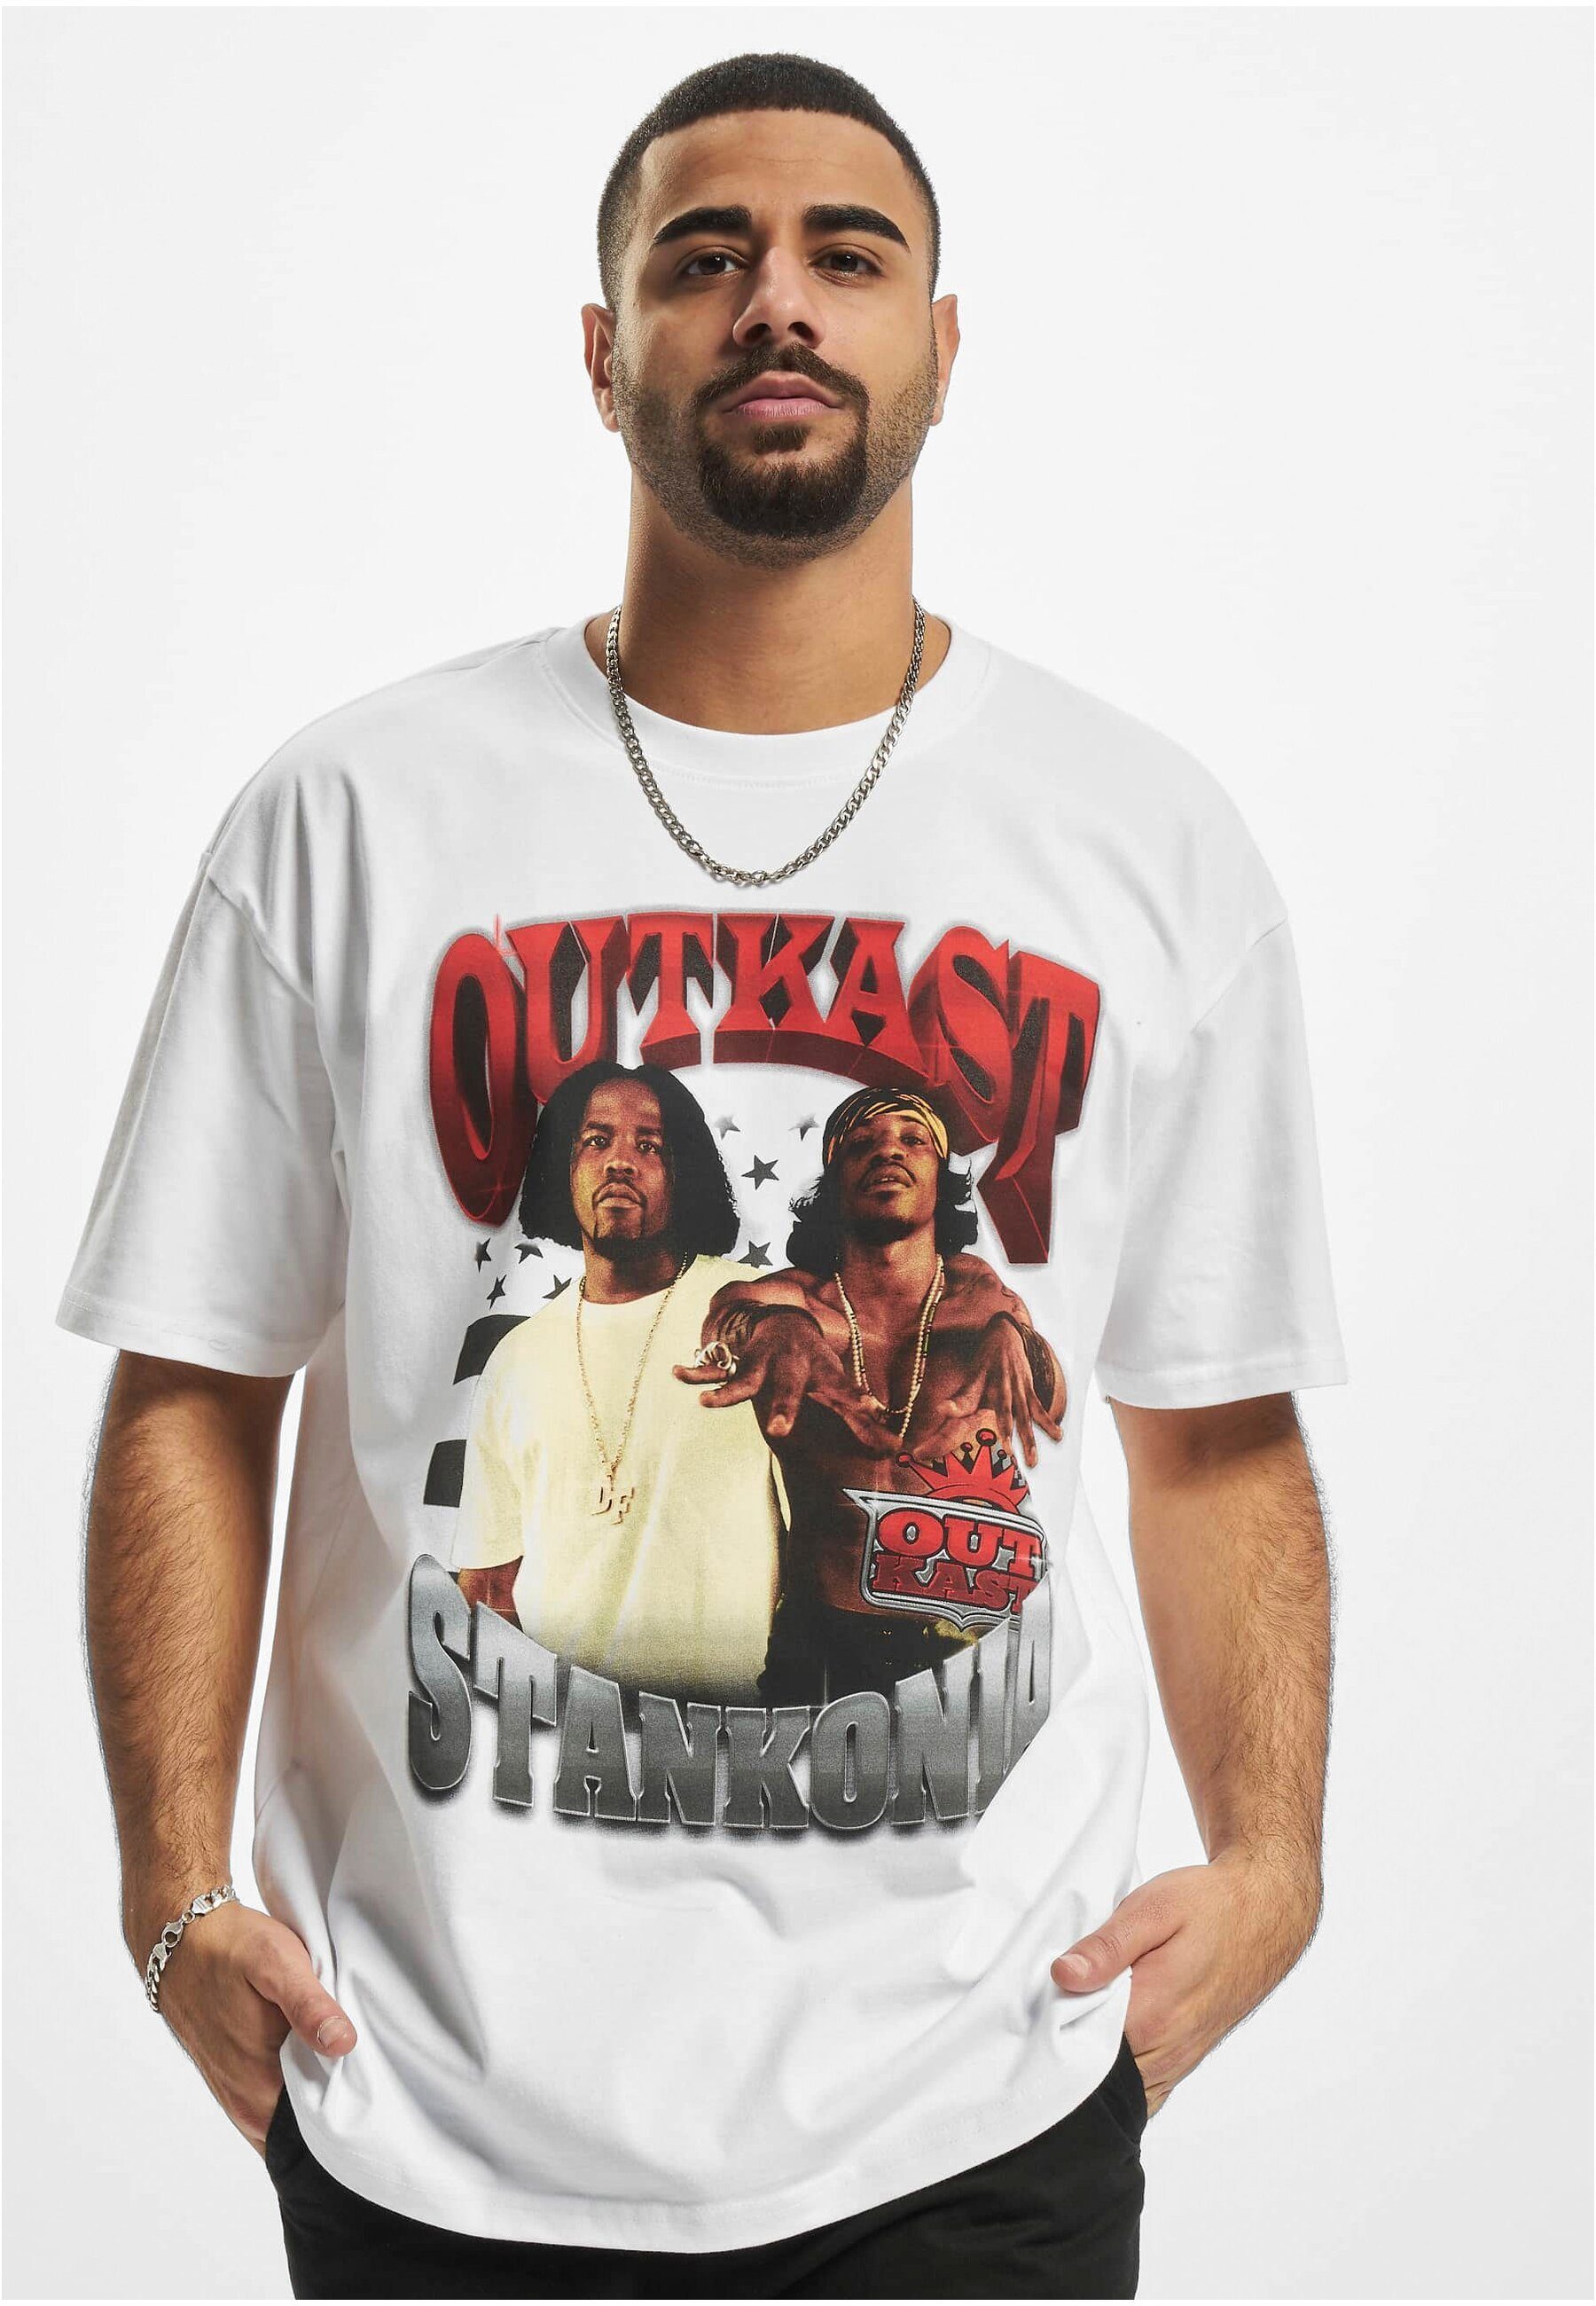 Tee Outkast Upscale white by Stankonia T-Shirt Herren Tee Oversize Mister (1-tlg)